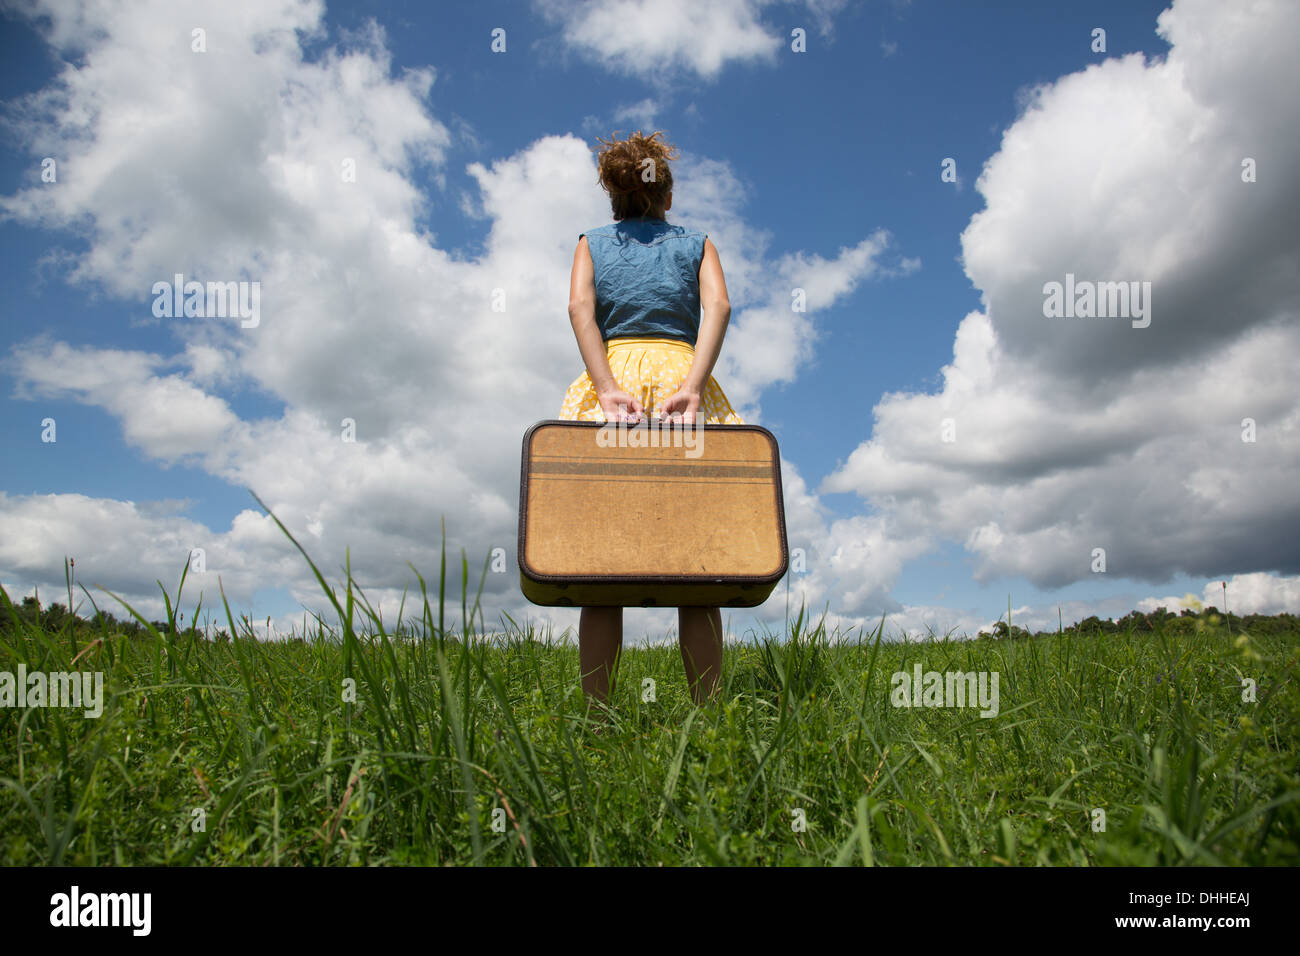 Teenage girl holding suitcase in field Banque D'Images